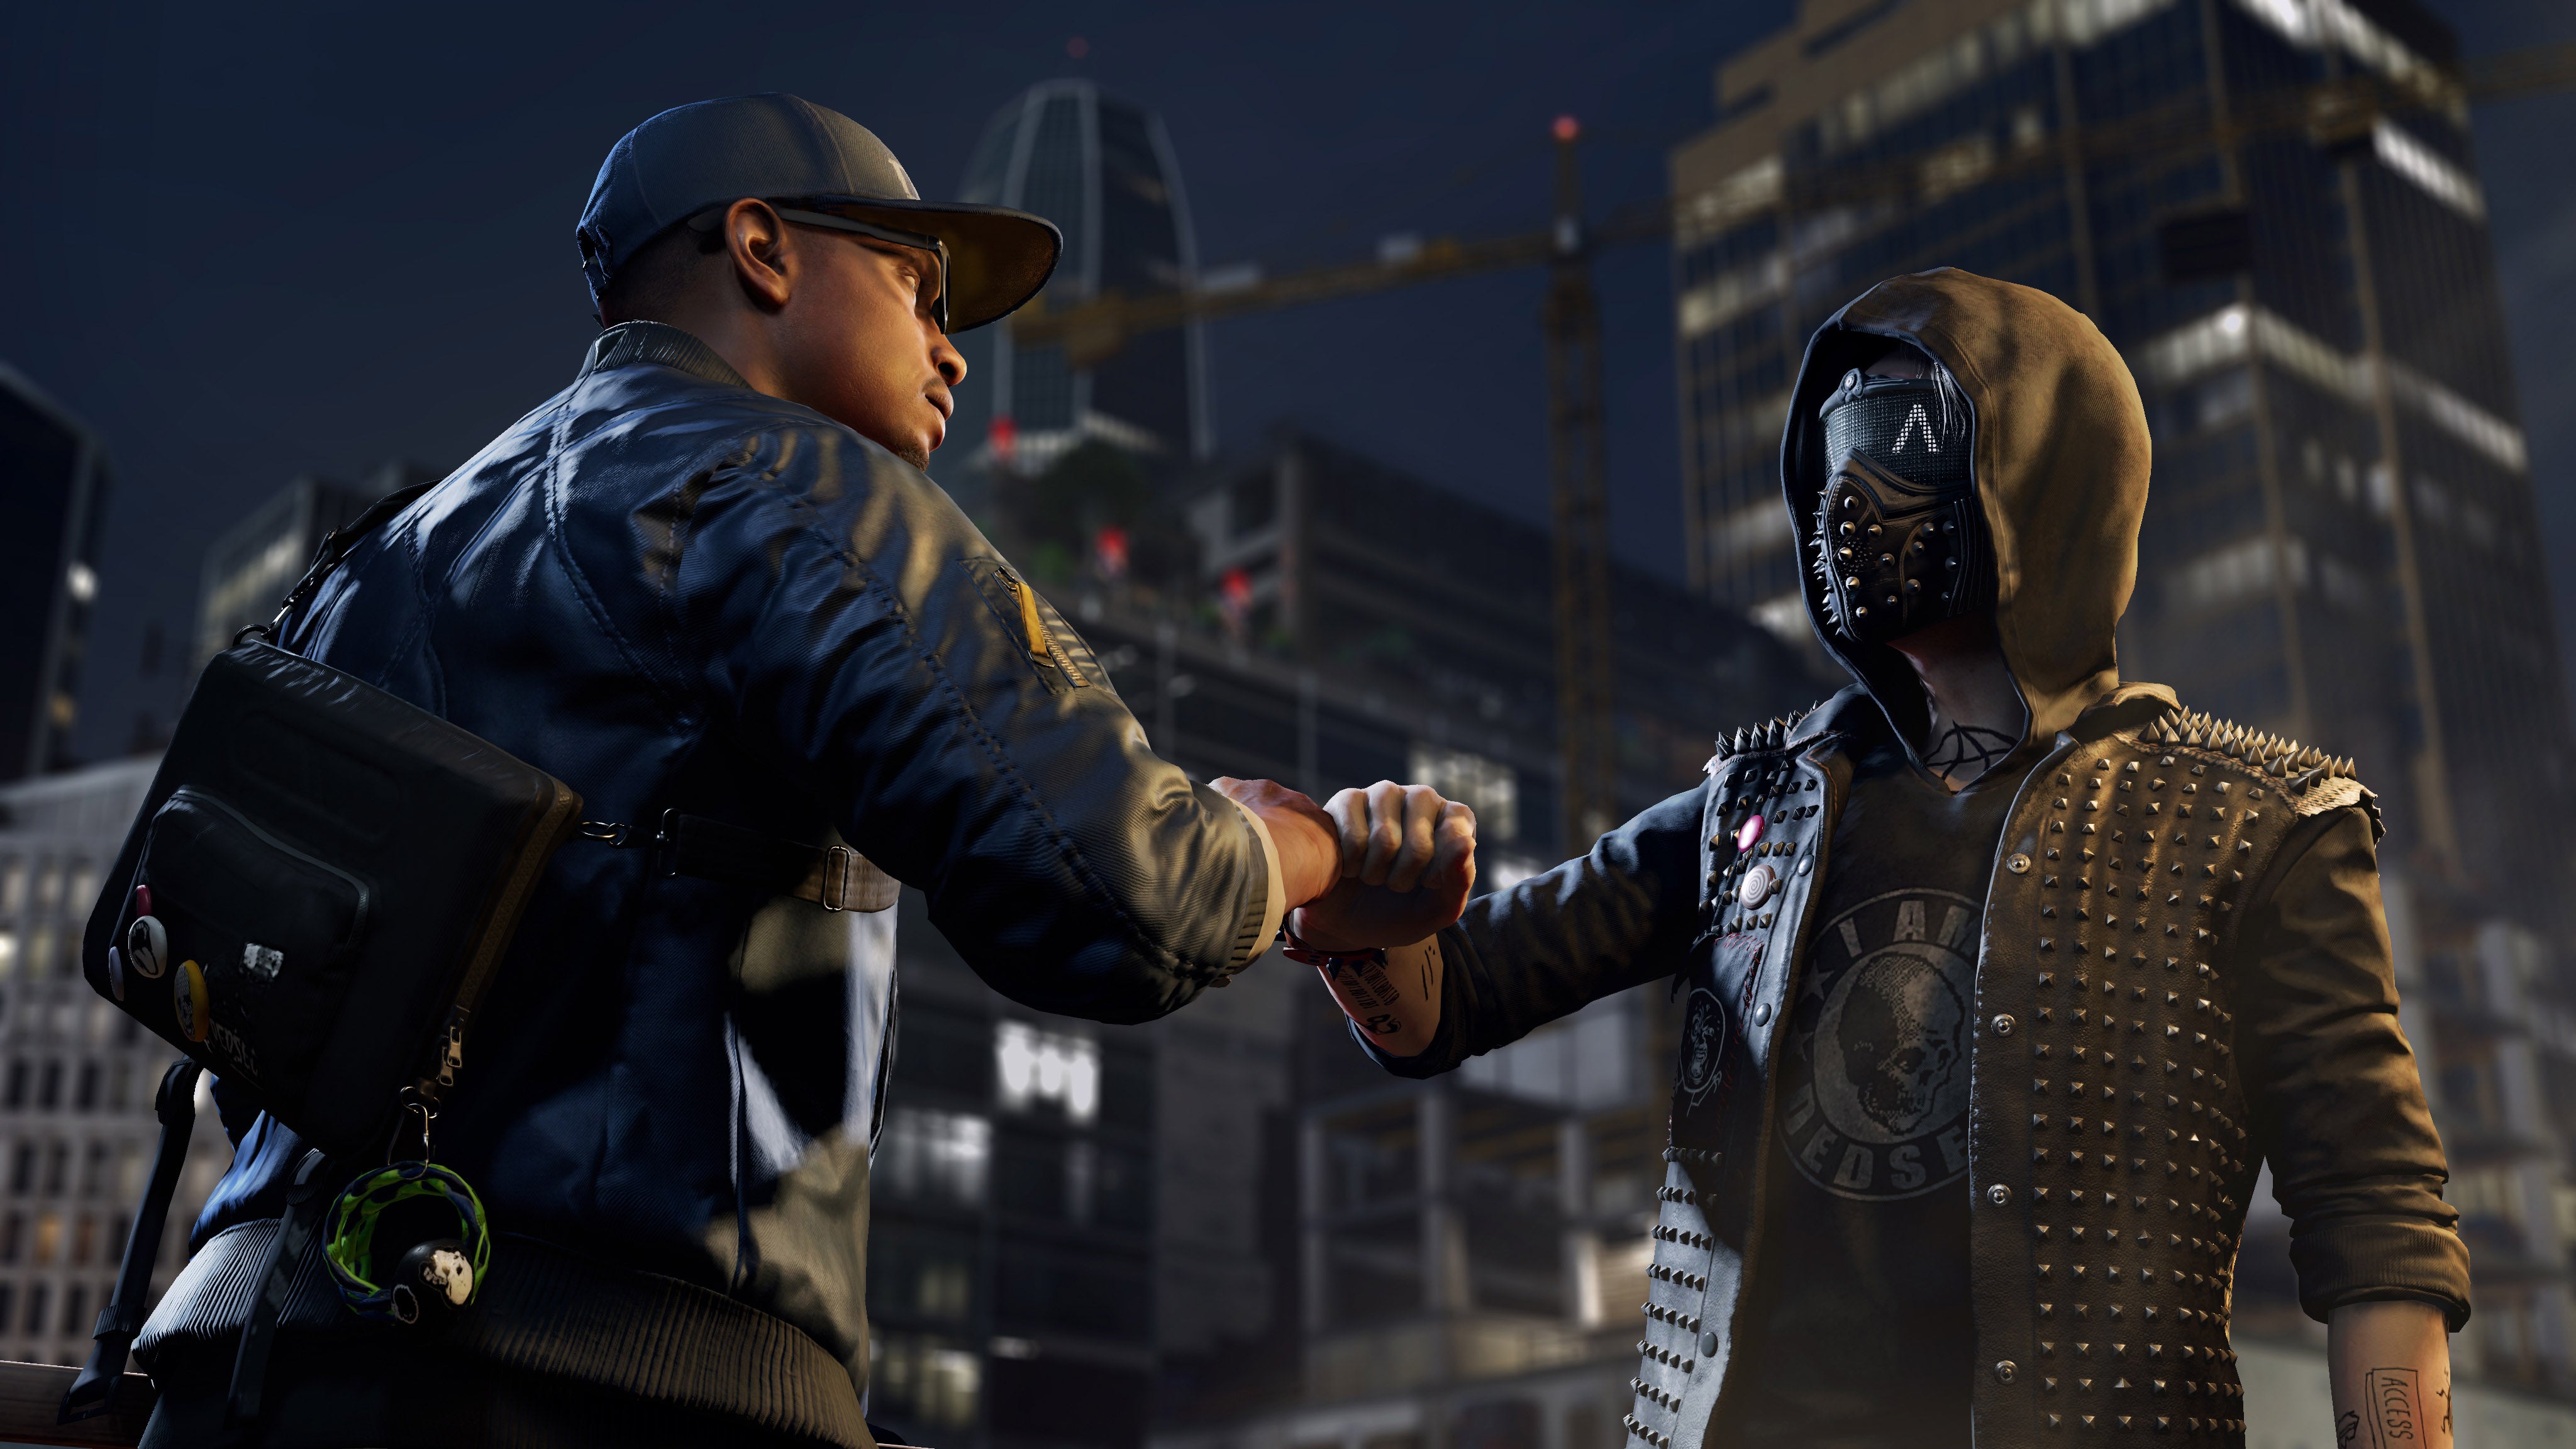 Image for Watch Dogs 2 sales have improved since "soft" release period thanks to word of mouth, says Ubisoft